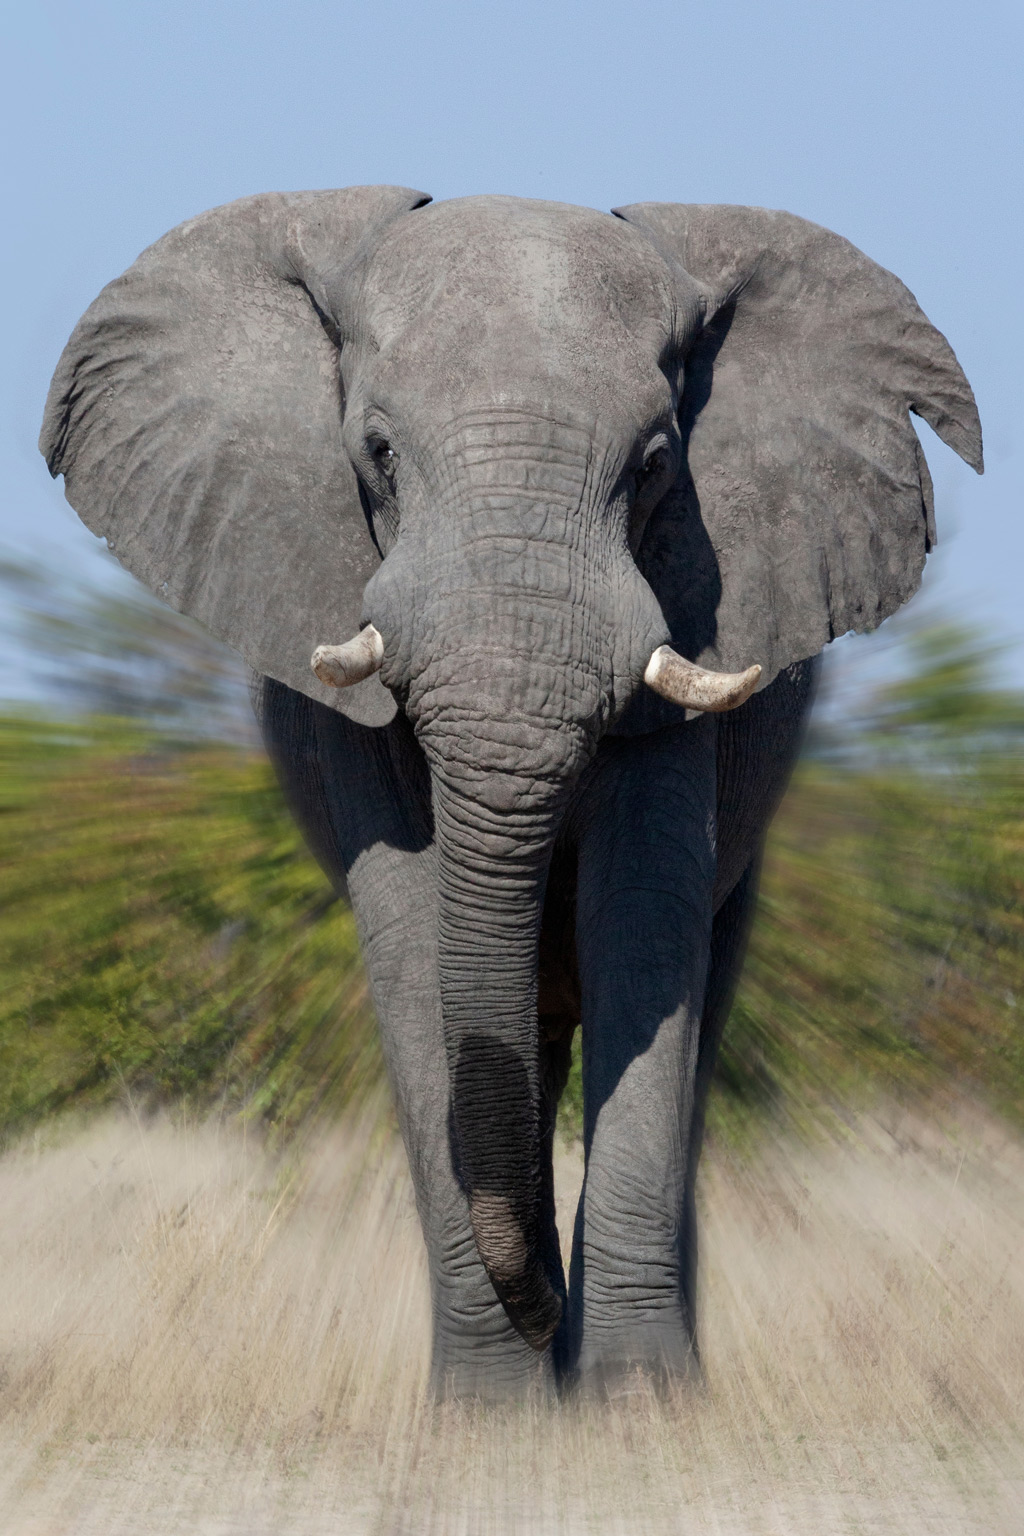 Elephant in a blurry background